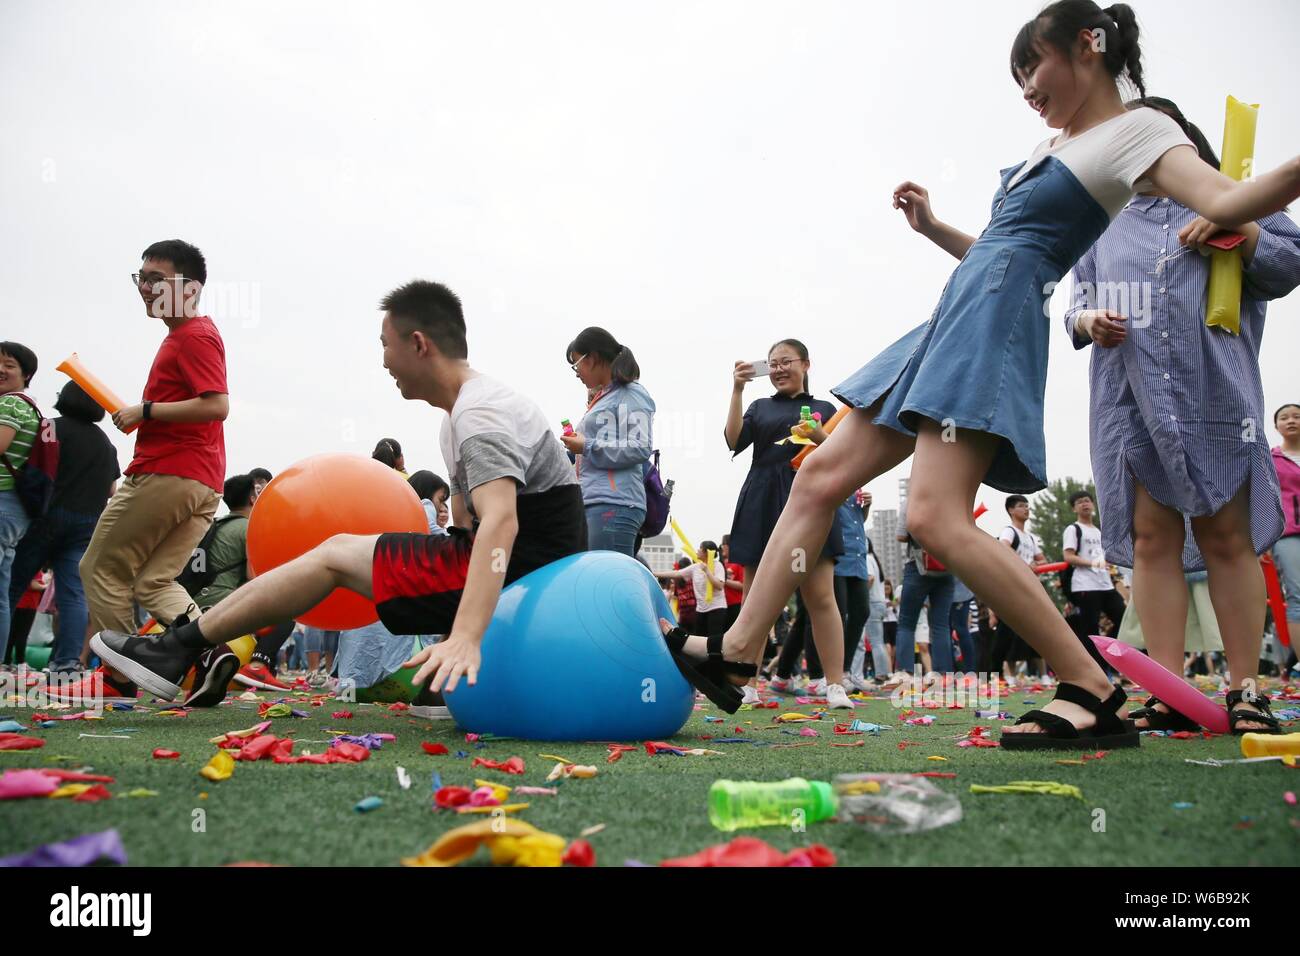 Senior high school students relieve stress by smashing balloons before the 2018 national college entrance examination, also known as Gaokao, at No.1 H Stock Photo